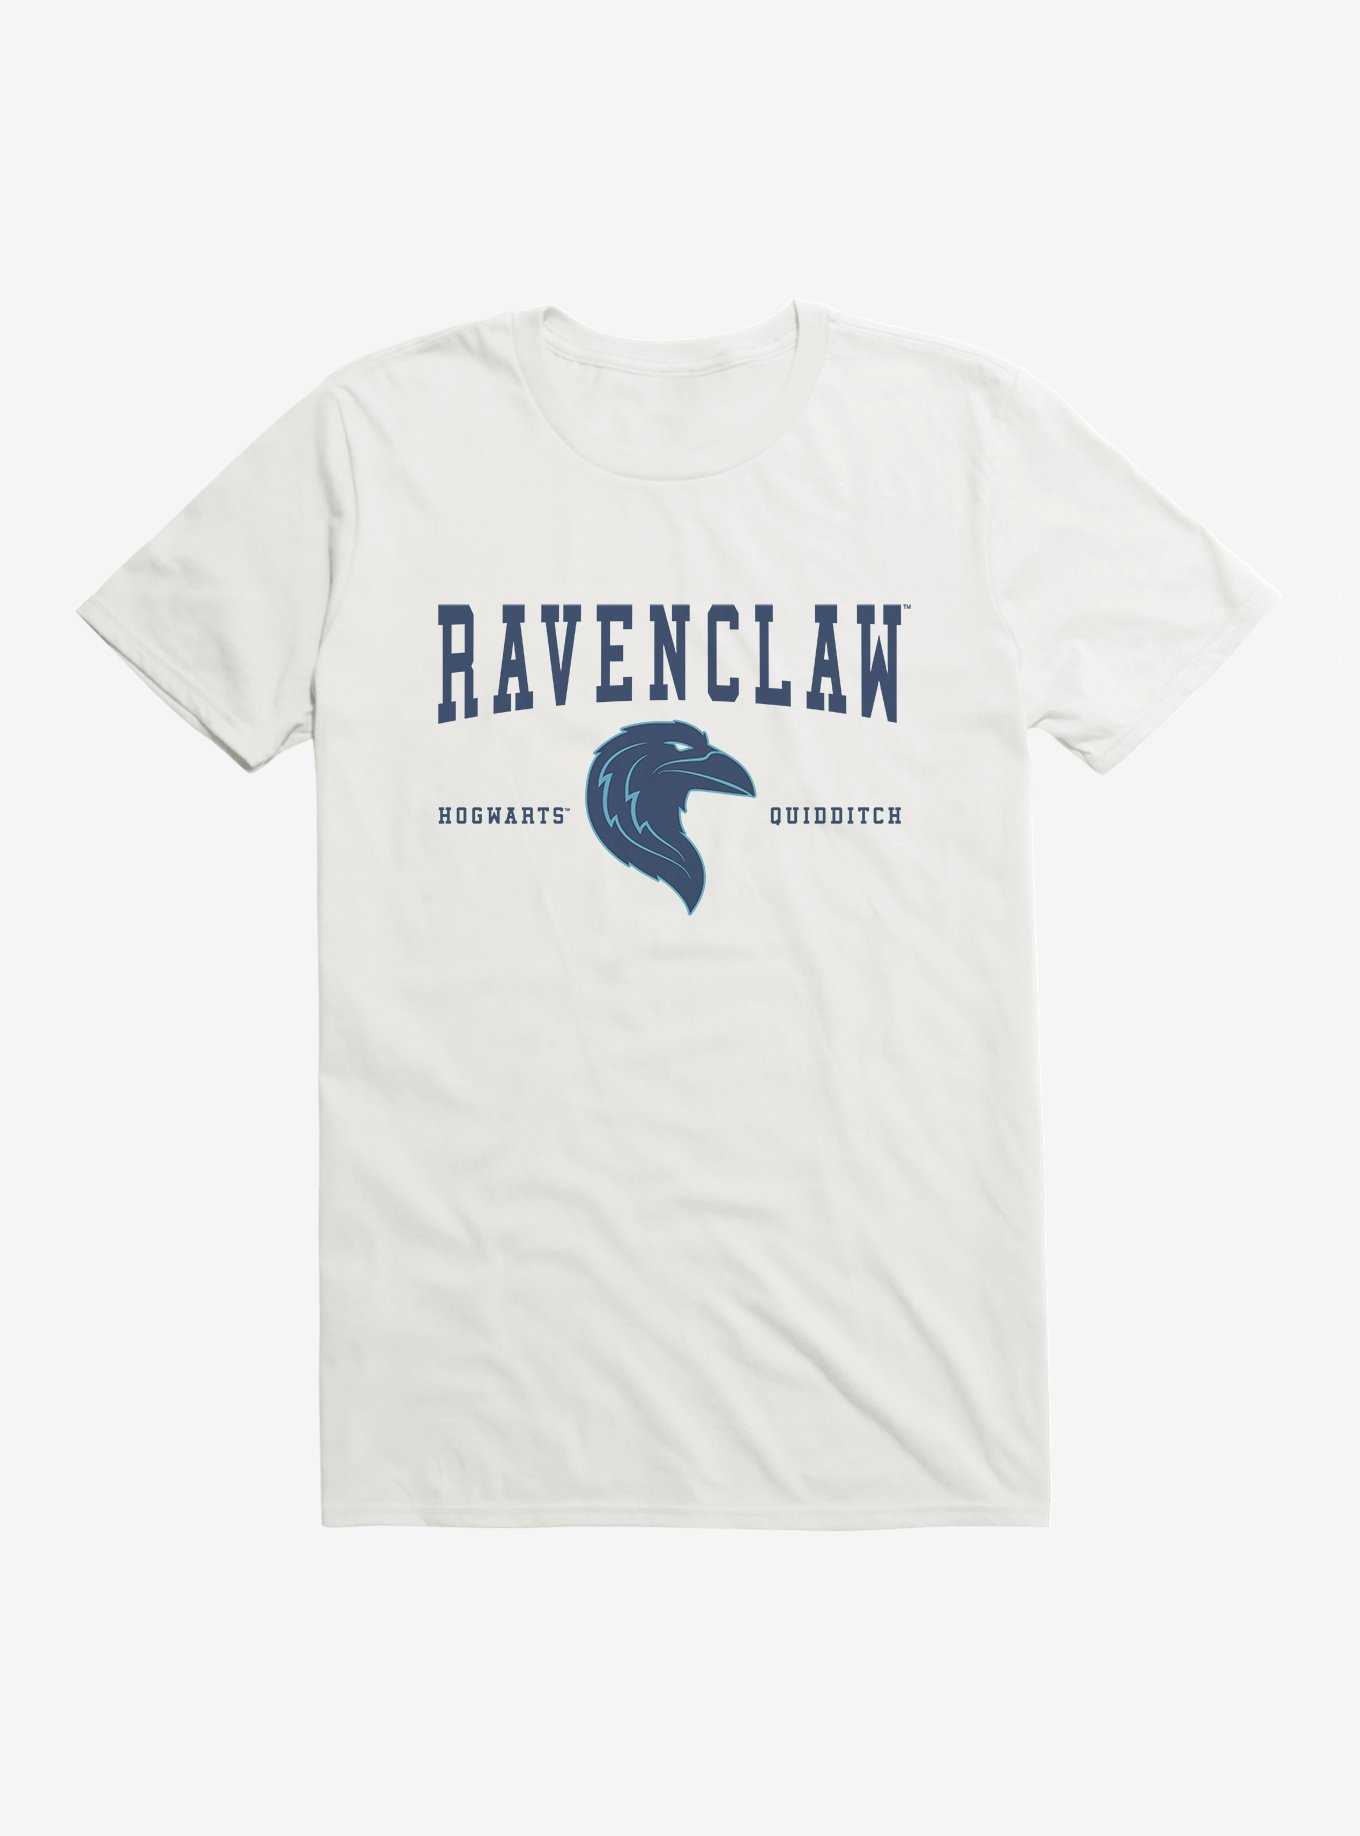 Harry Potter Ravenclaw Crest Sticker, Hot Topic